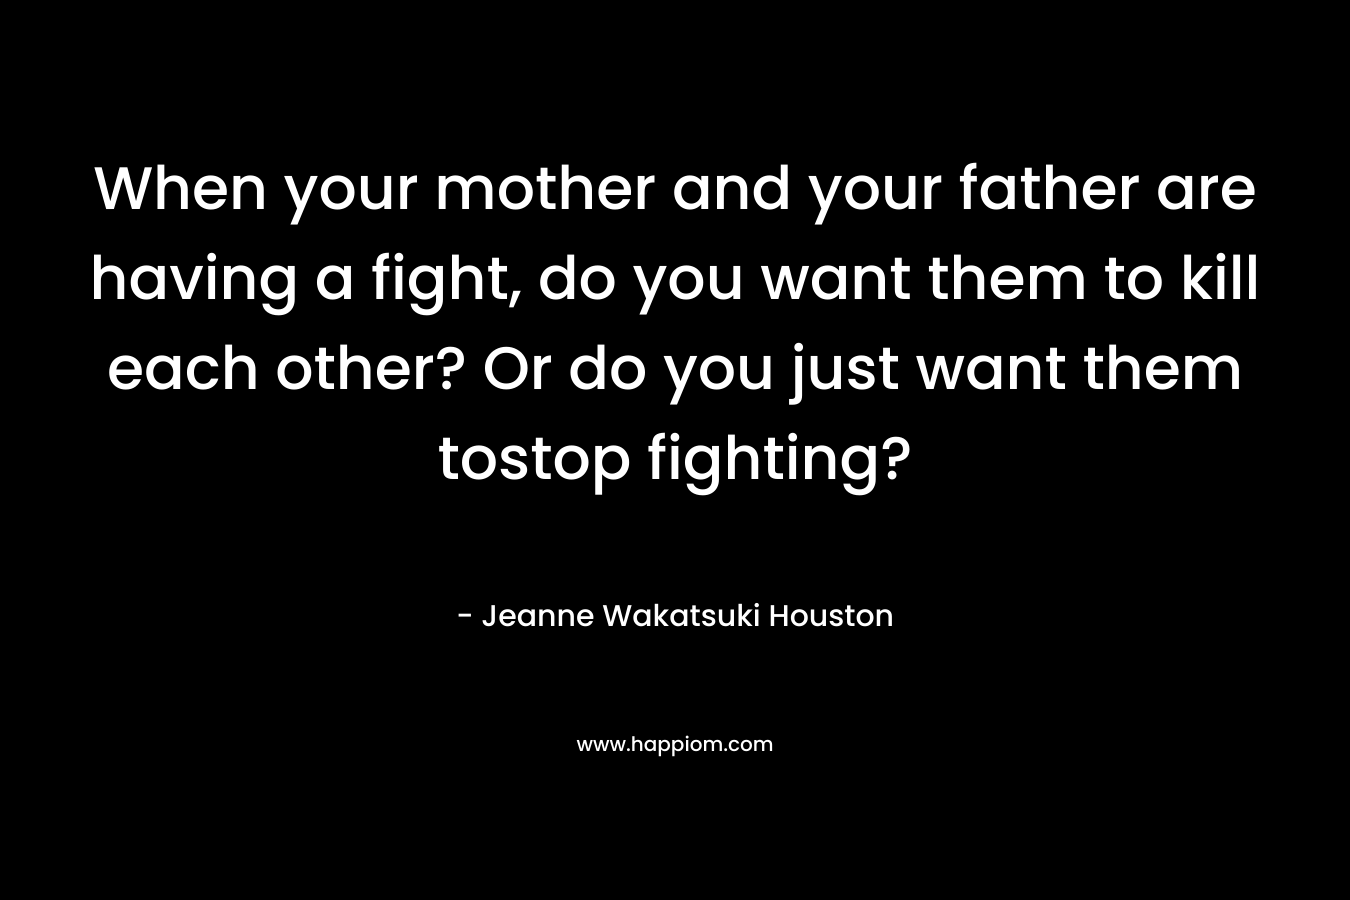 When your mother and your father are having a fight, do you want them to kill each other? Or do you just want them tostop fighting? – Jeanne Wakatsuki Houston